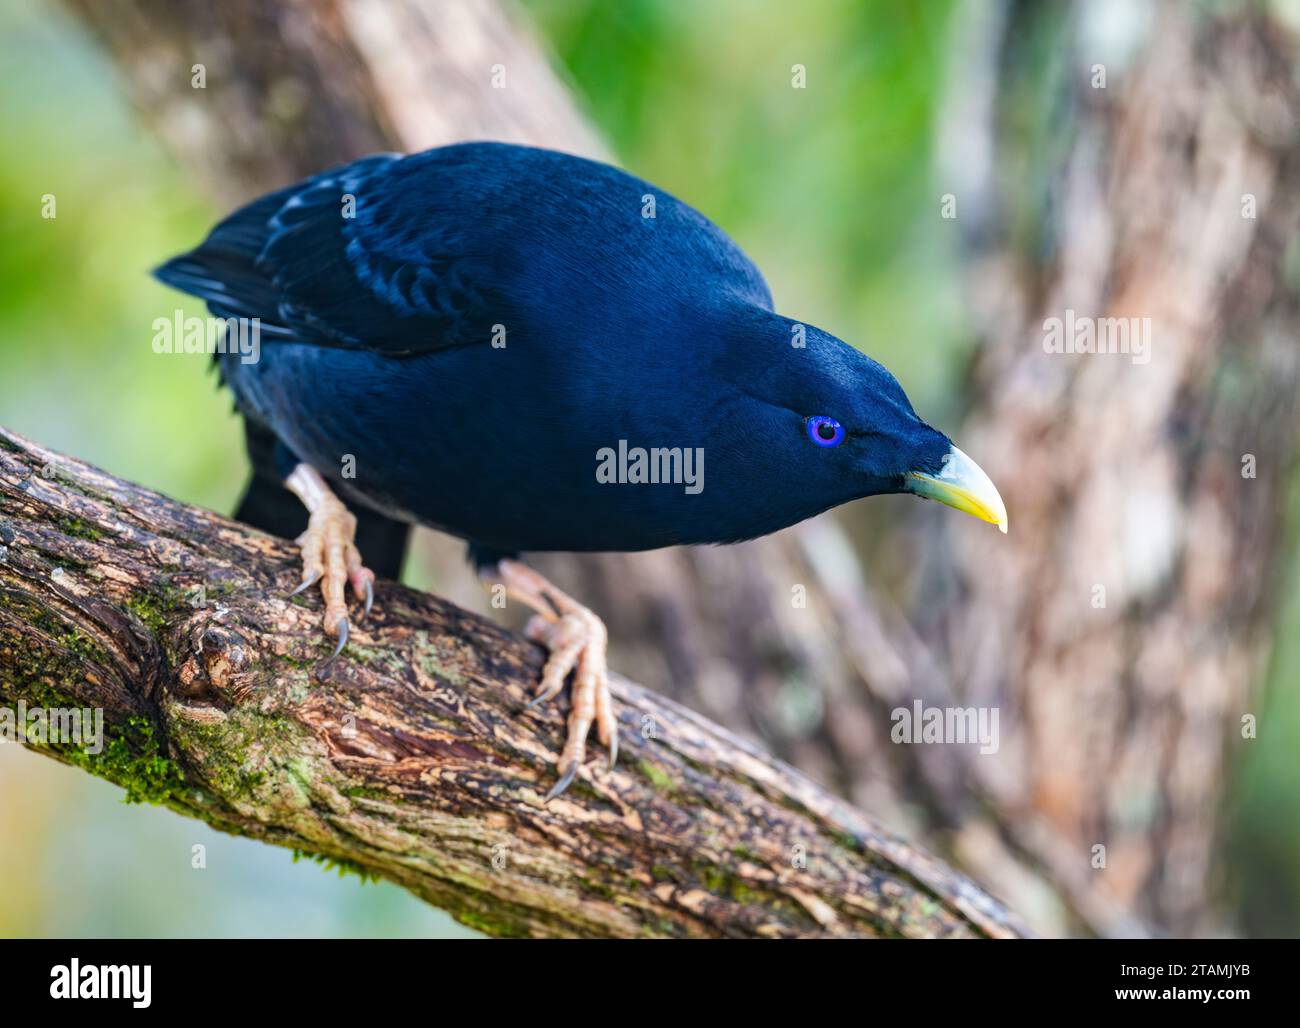 A male Satin Bowerbird (Ptilonorhynchus violaceus) perched on a tree. Queensland, Australia. Stock Photo